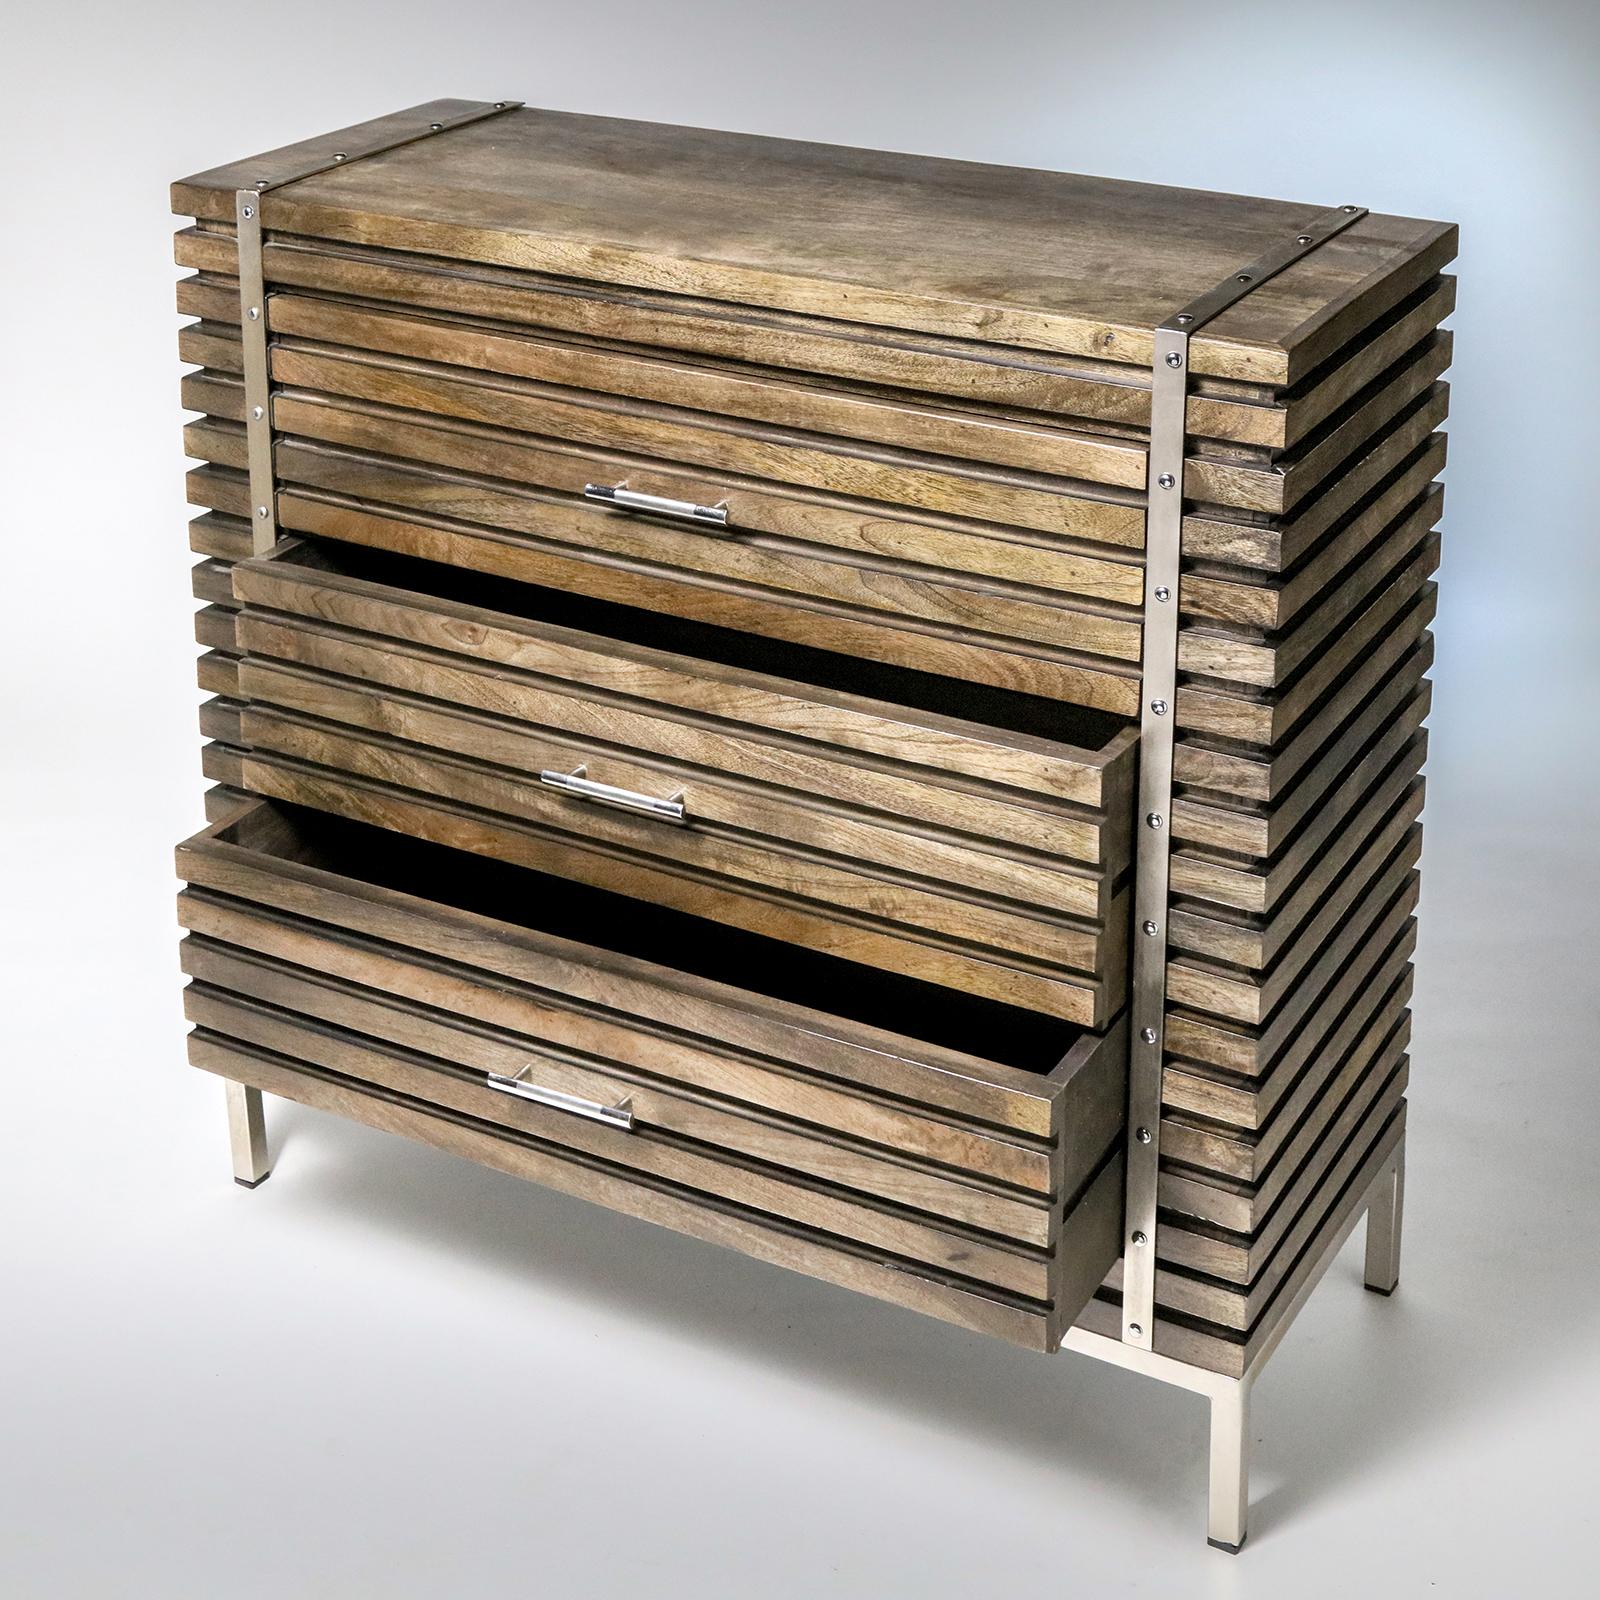 Sleek, modern 3-drawer chest in horizontal mahogany slats with polished steel legs, straps, and hardware.